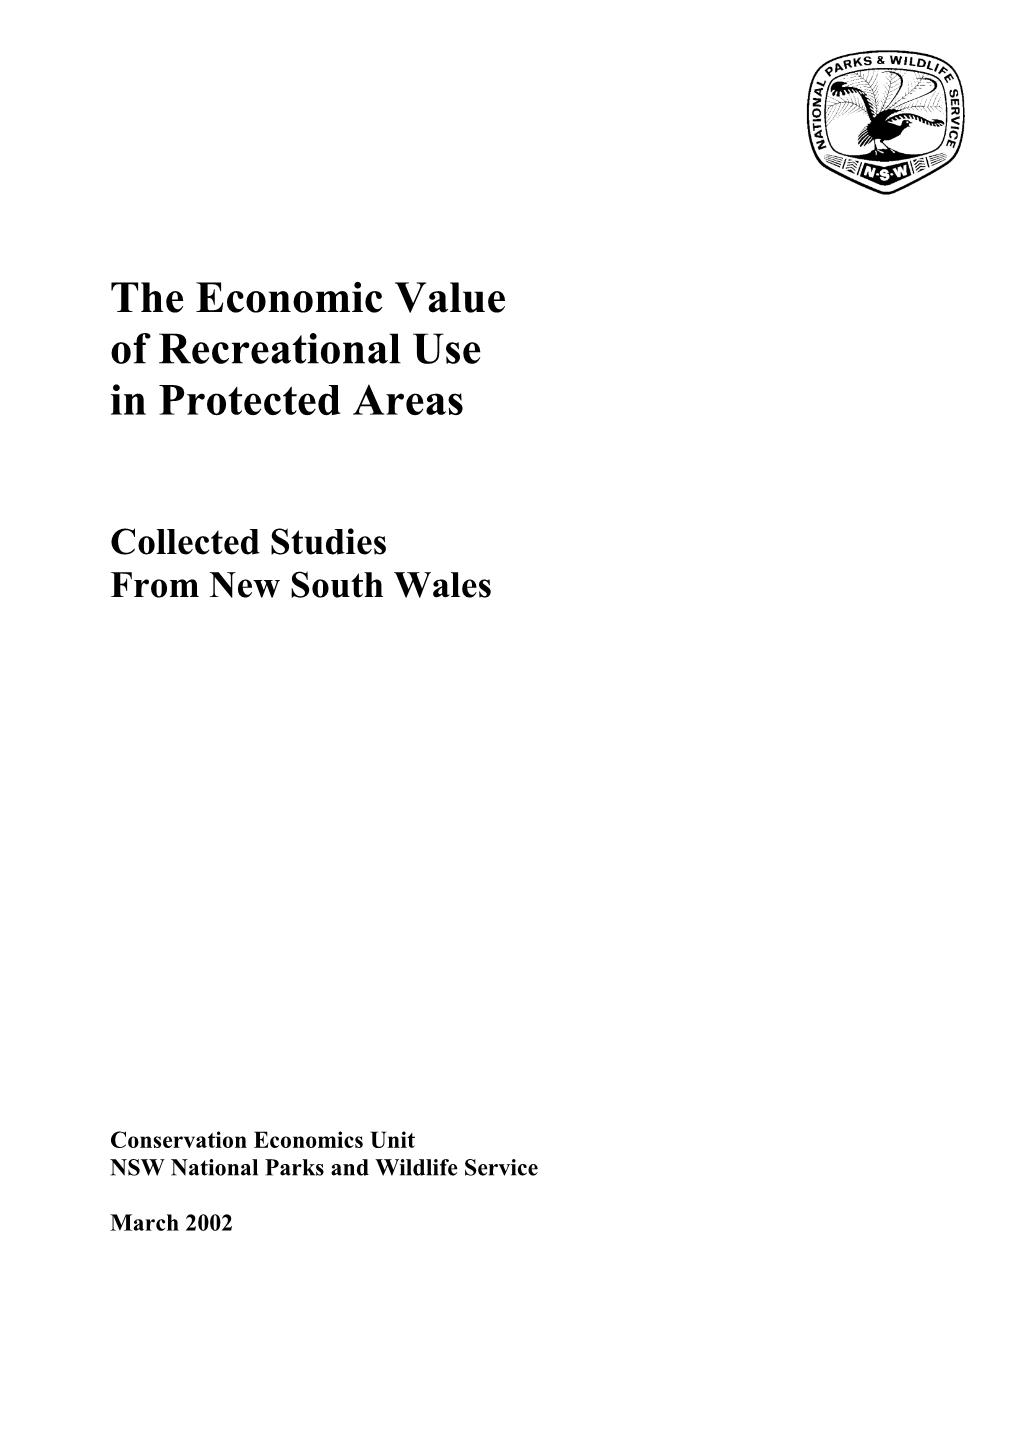 The Economic Value of Recreational Use in Protected Areas